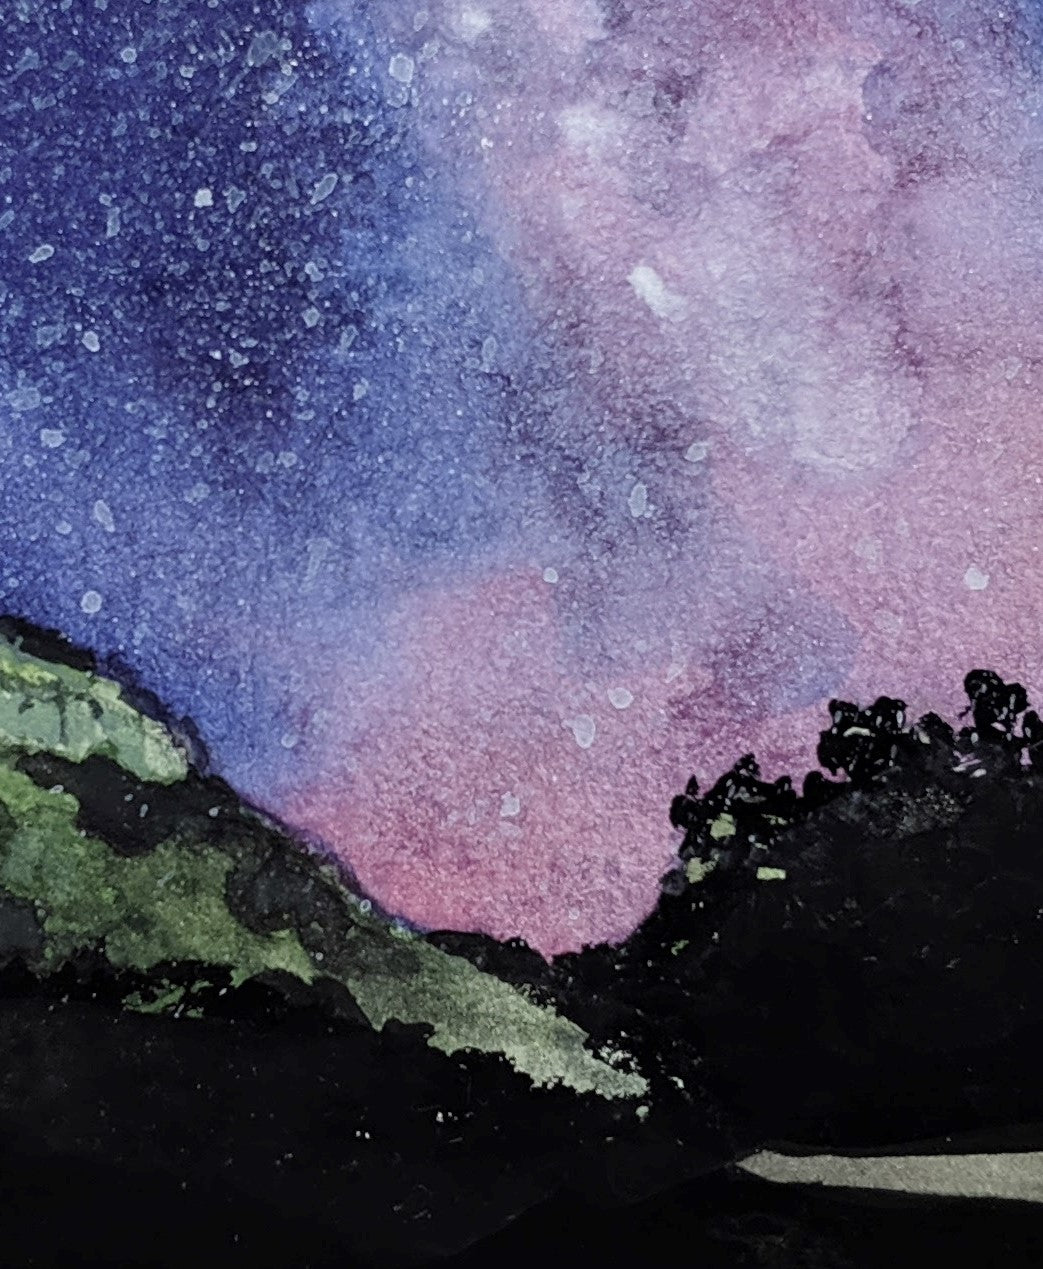 Chris's Galaxy watercolor painting detail